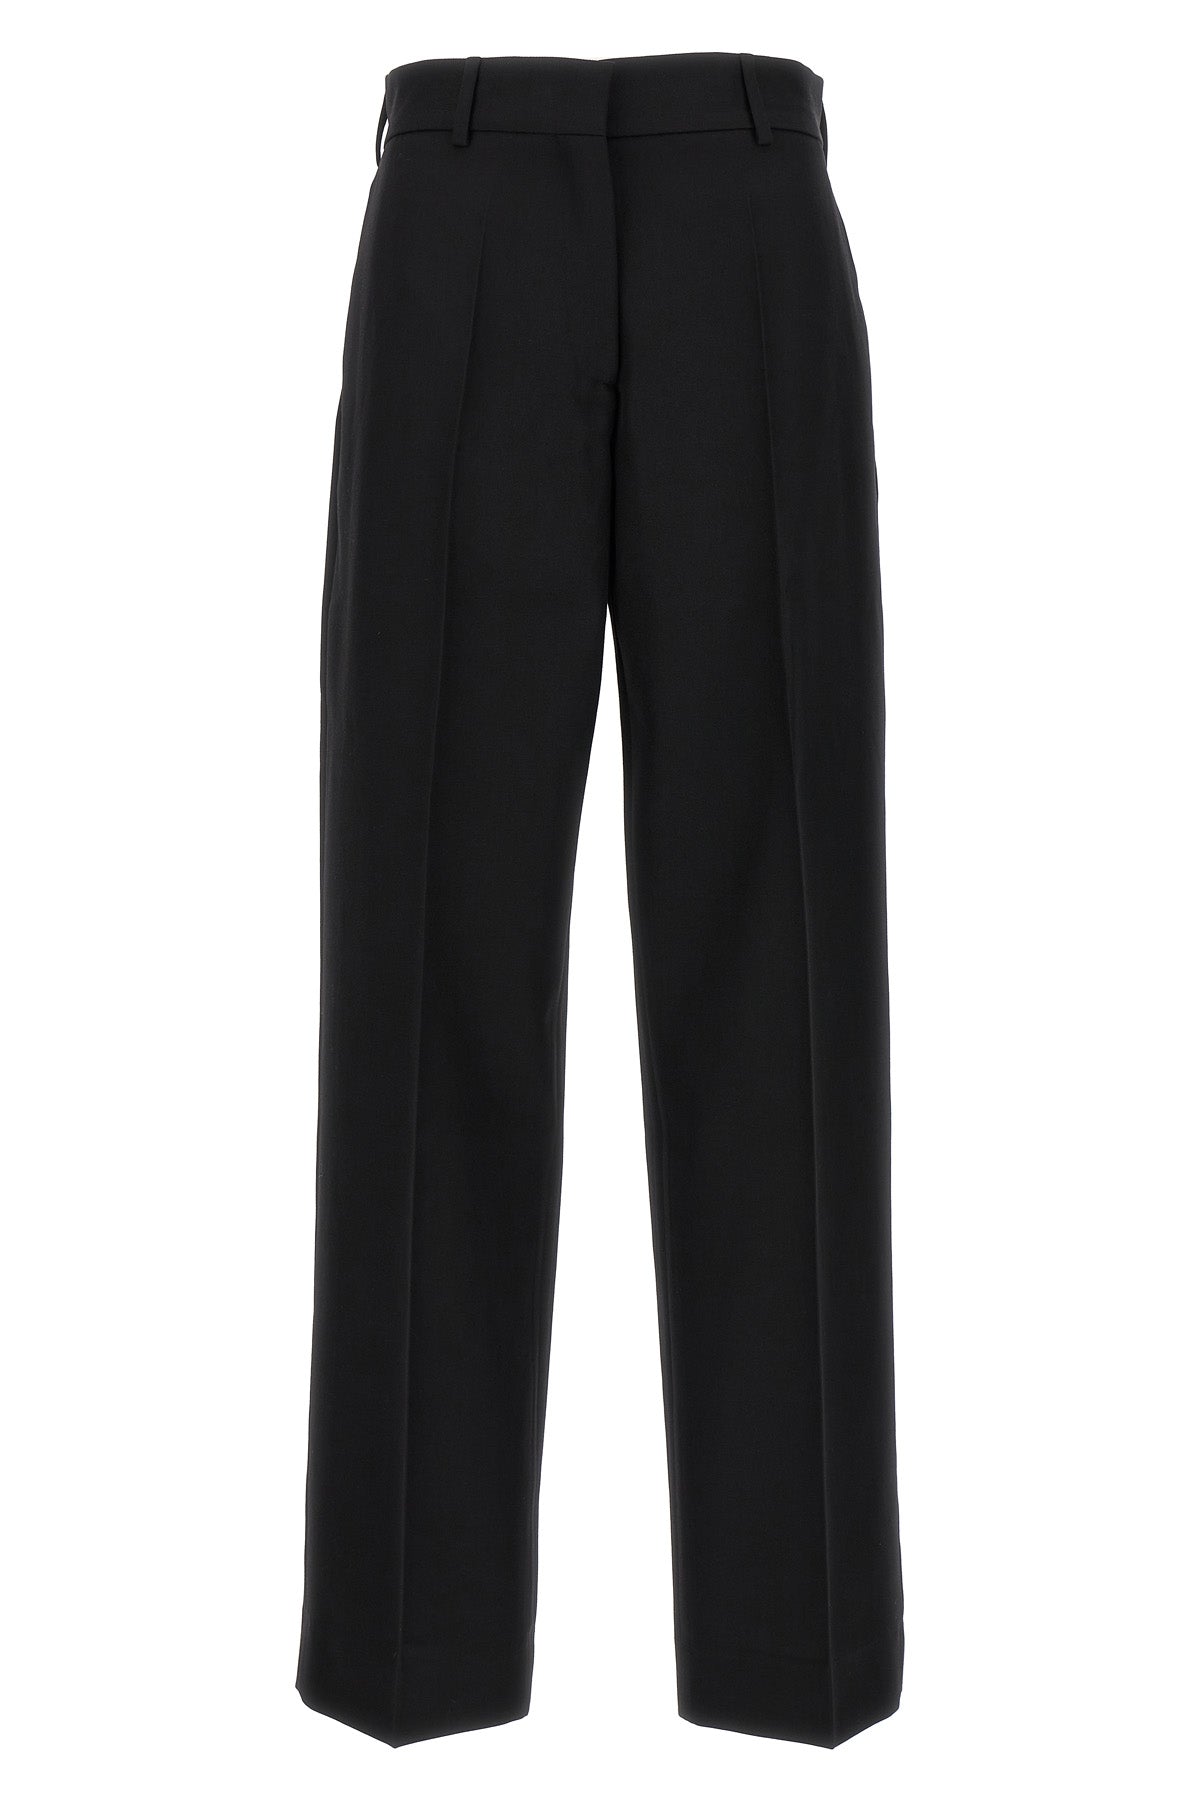 PALM ANGELS CLASSIC TROUSERS